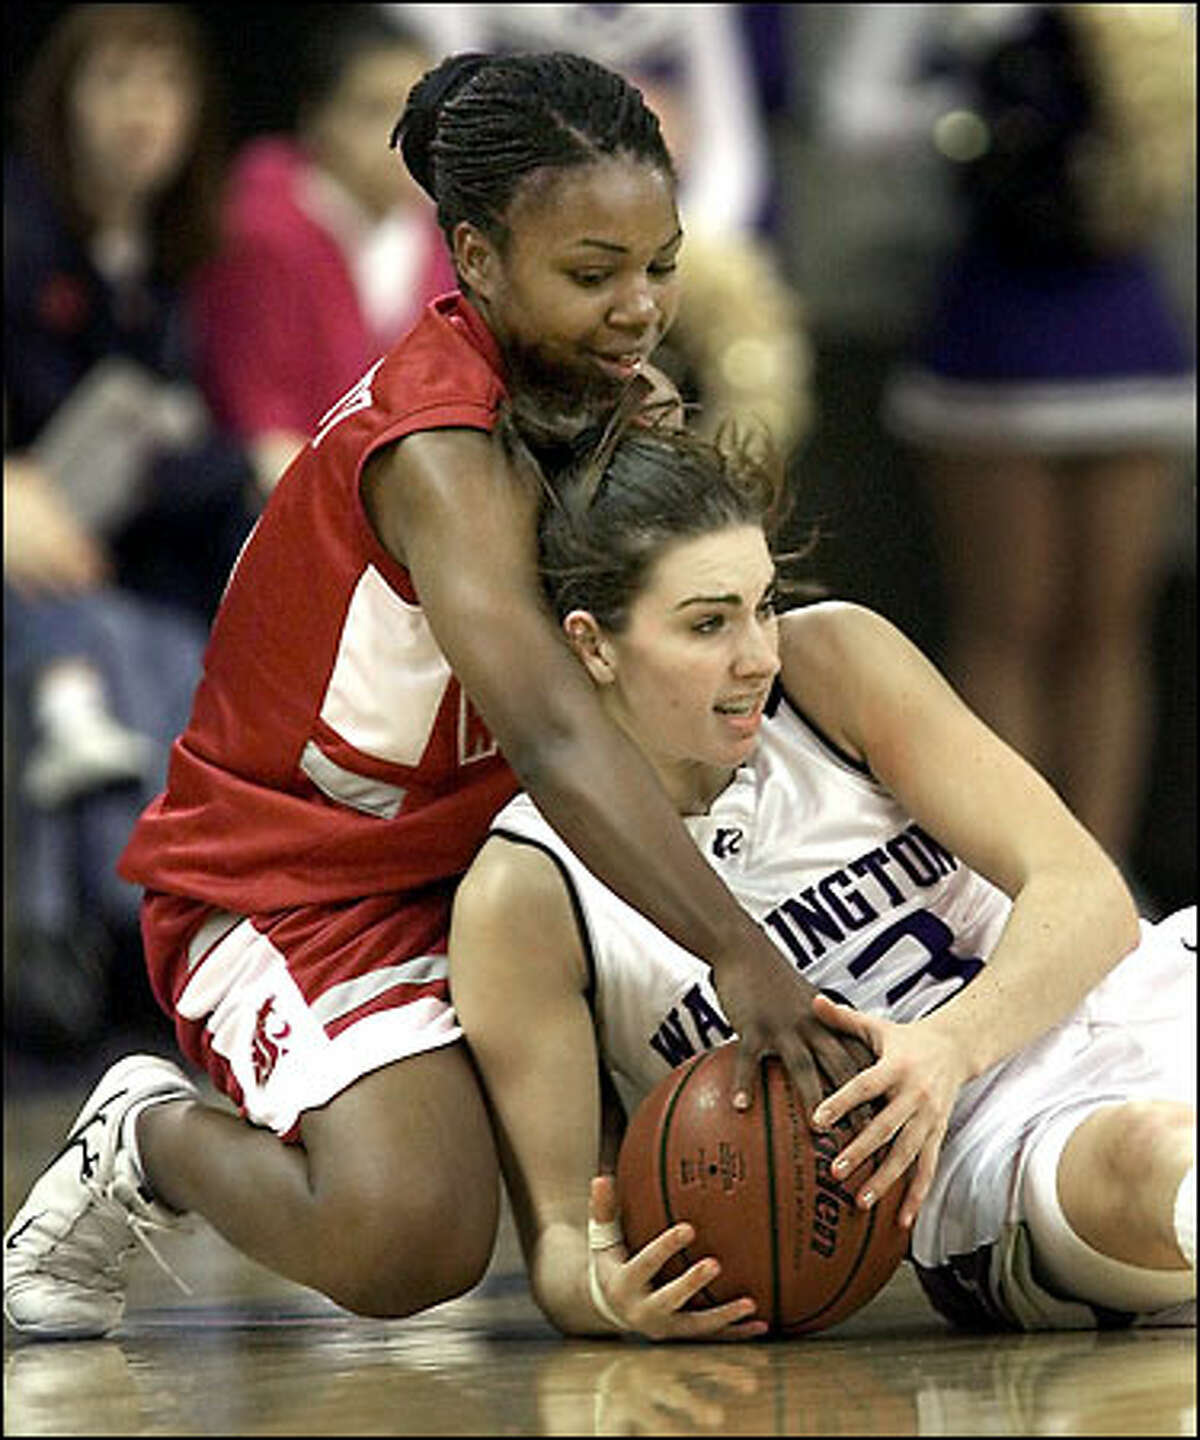 Washington State's Jessica Perry, left, and Washington's Kristen O'Neill battle for a ball during first half play at Hec Edmundson Pavilion.